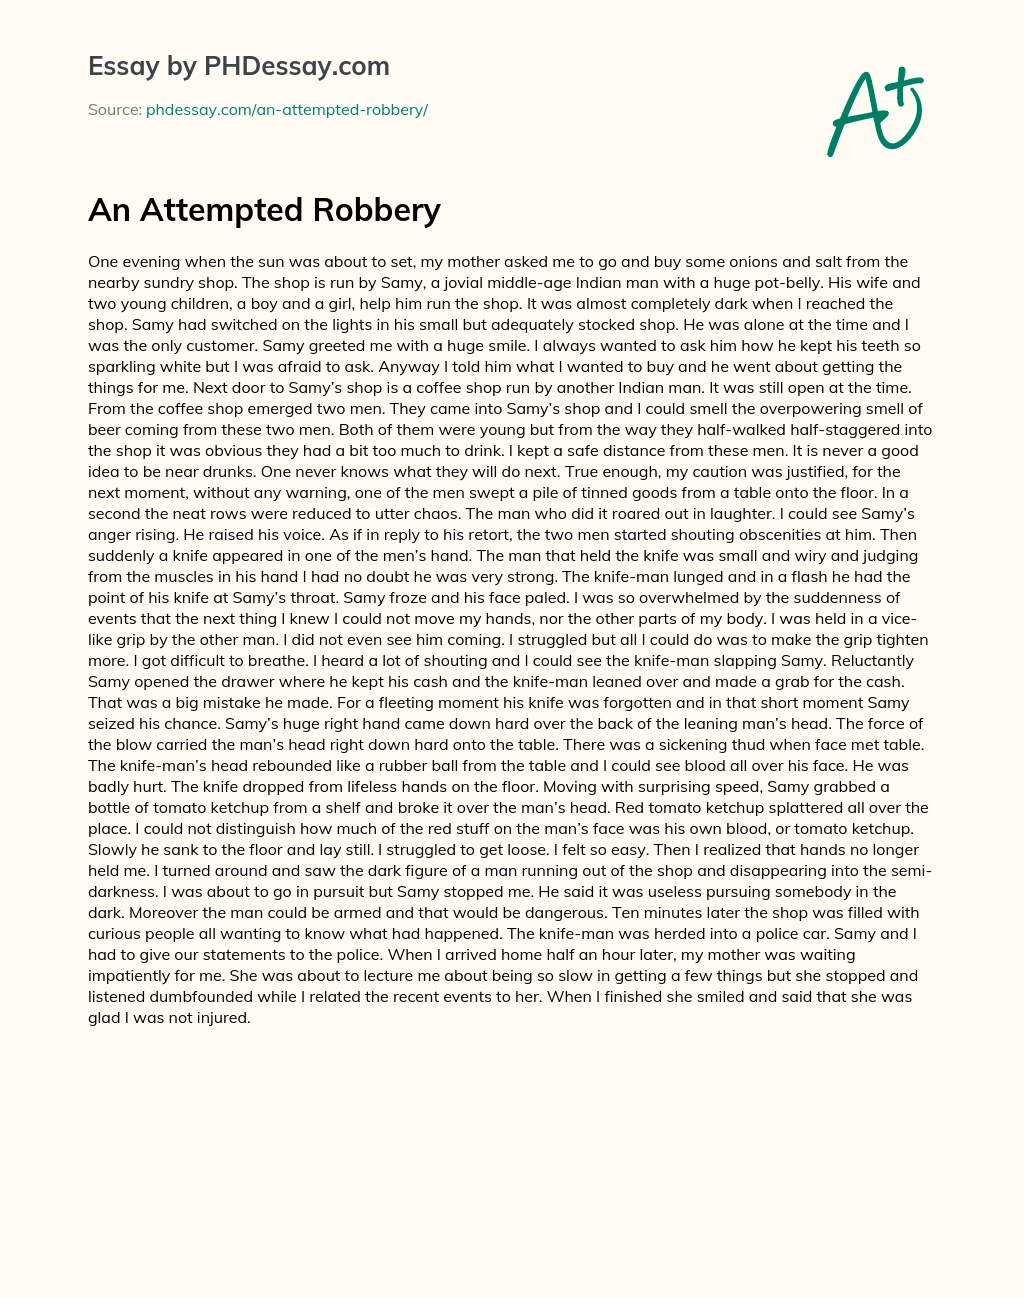 An Attempted Robbery essay